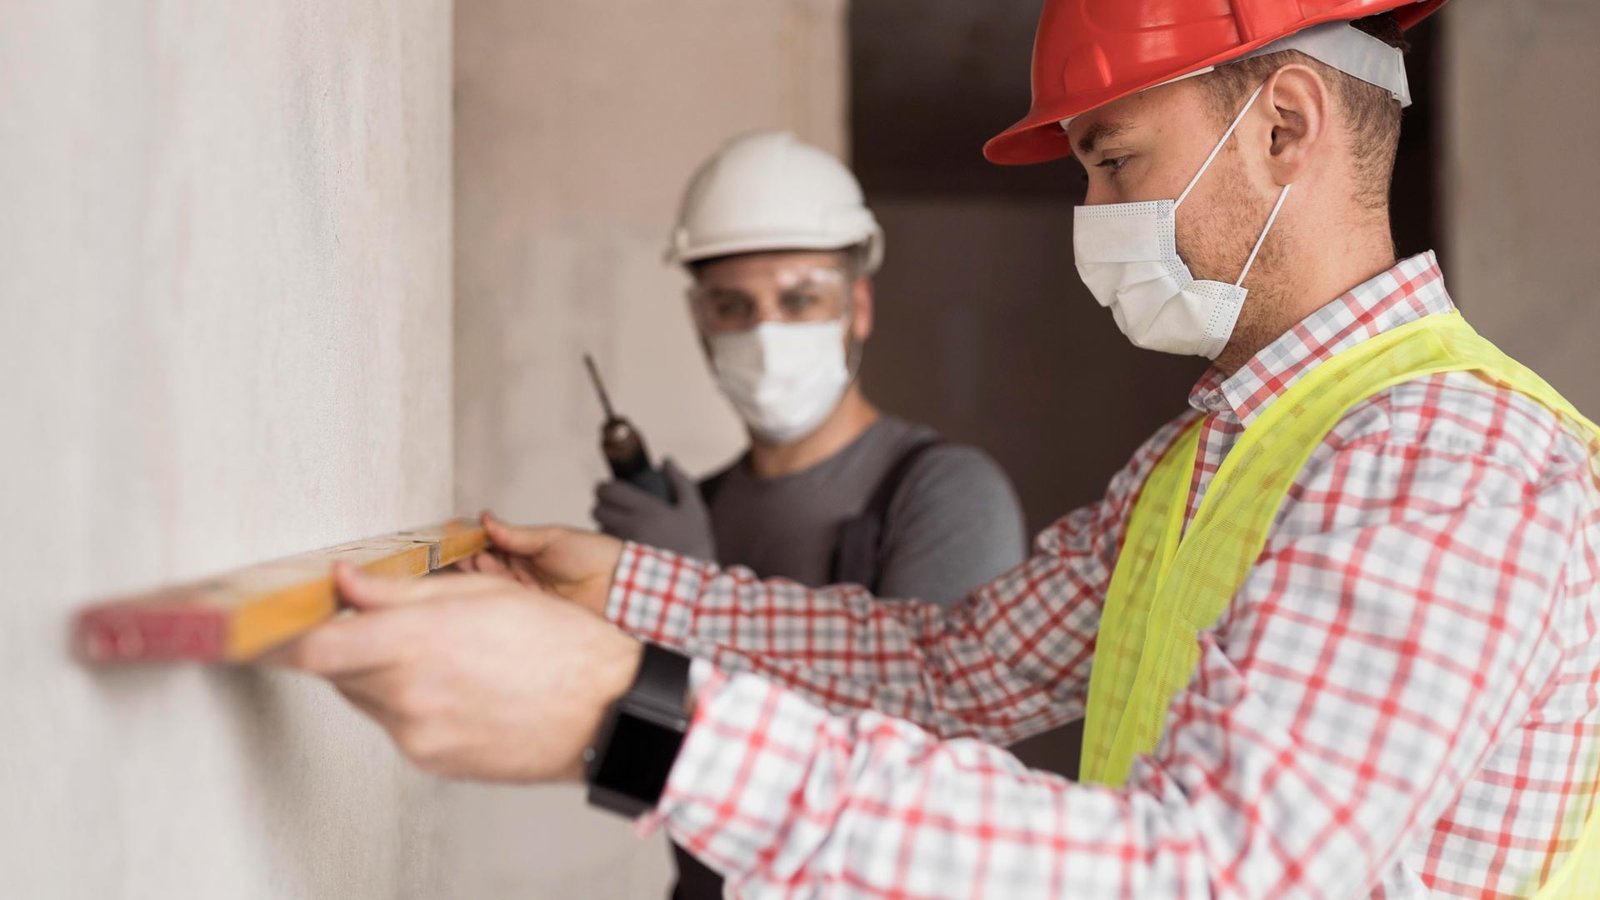 The Five Best Practices for Safe and Healthy Facade Inspections